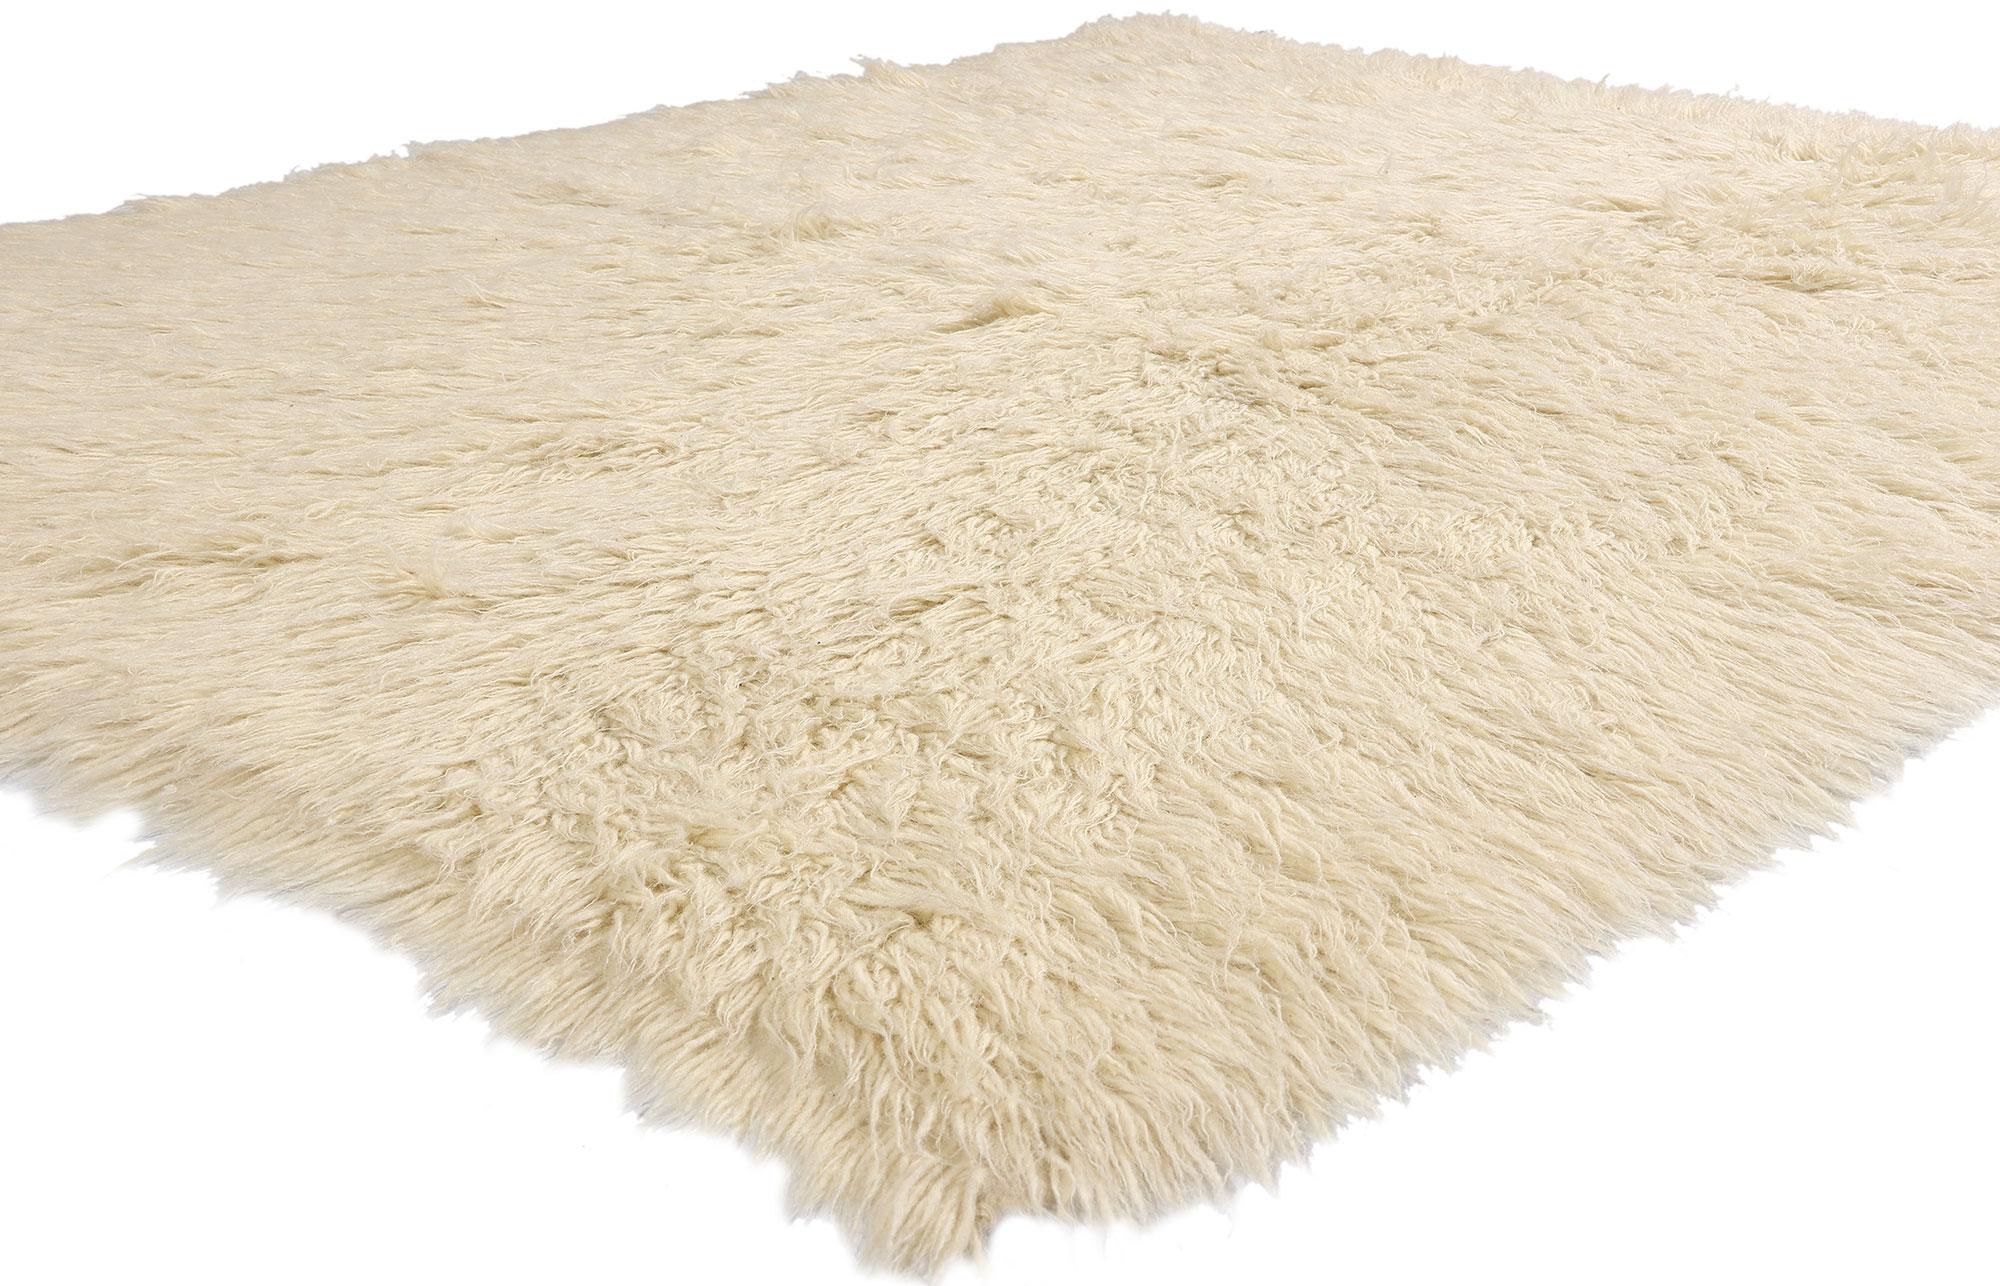 53946 Vintage Greek Natural Flokati Rug, 05'10 x 06'10. Greek Flokati rugs are traditional handwoven wool rugs made in the region of Epirus, Greece, known for their soft, shaggy texture and warmth. Crafted from 100% natural sheep's wool, these rugs